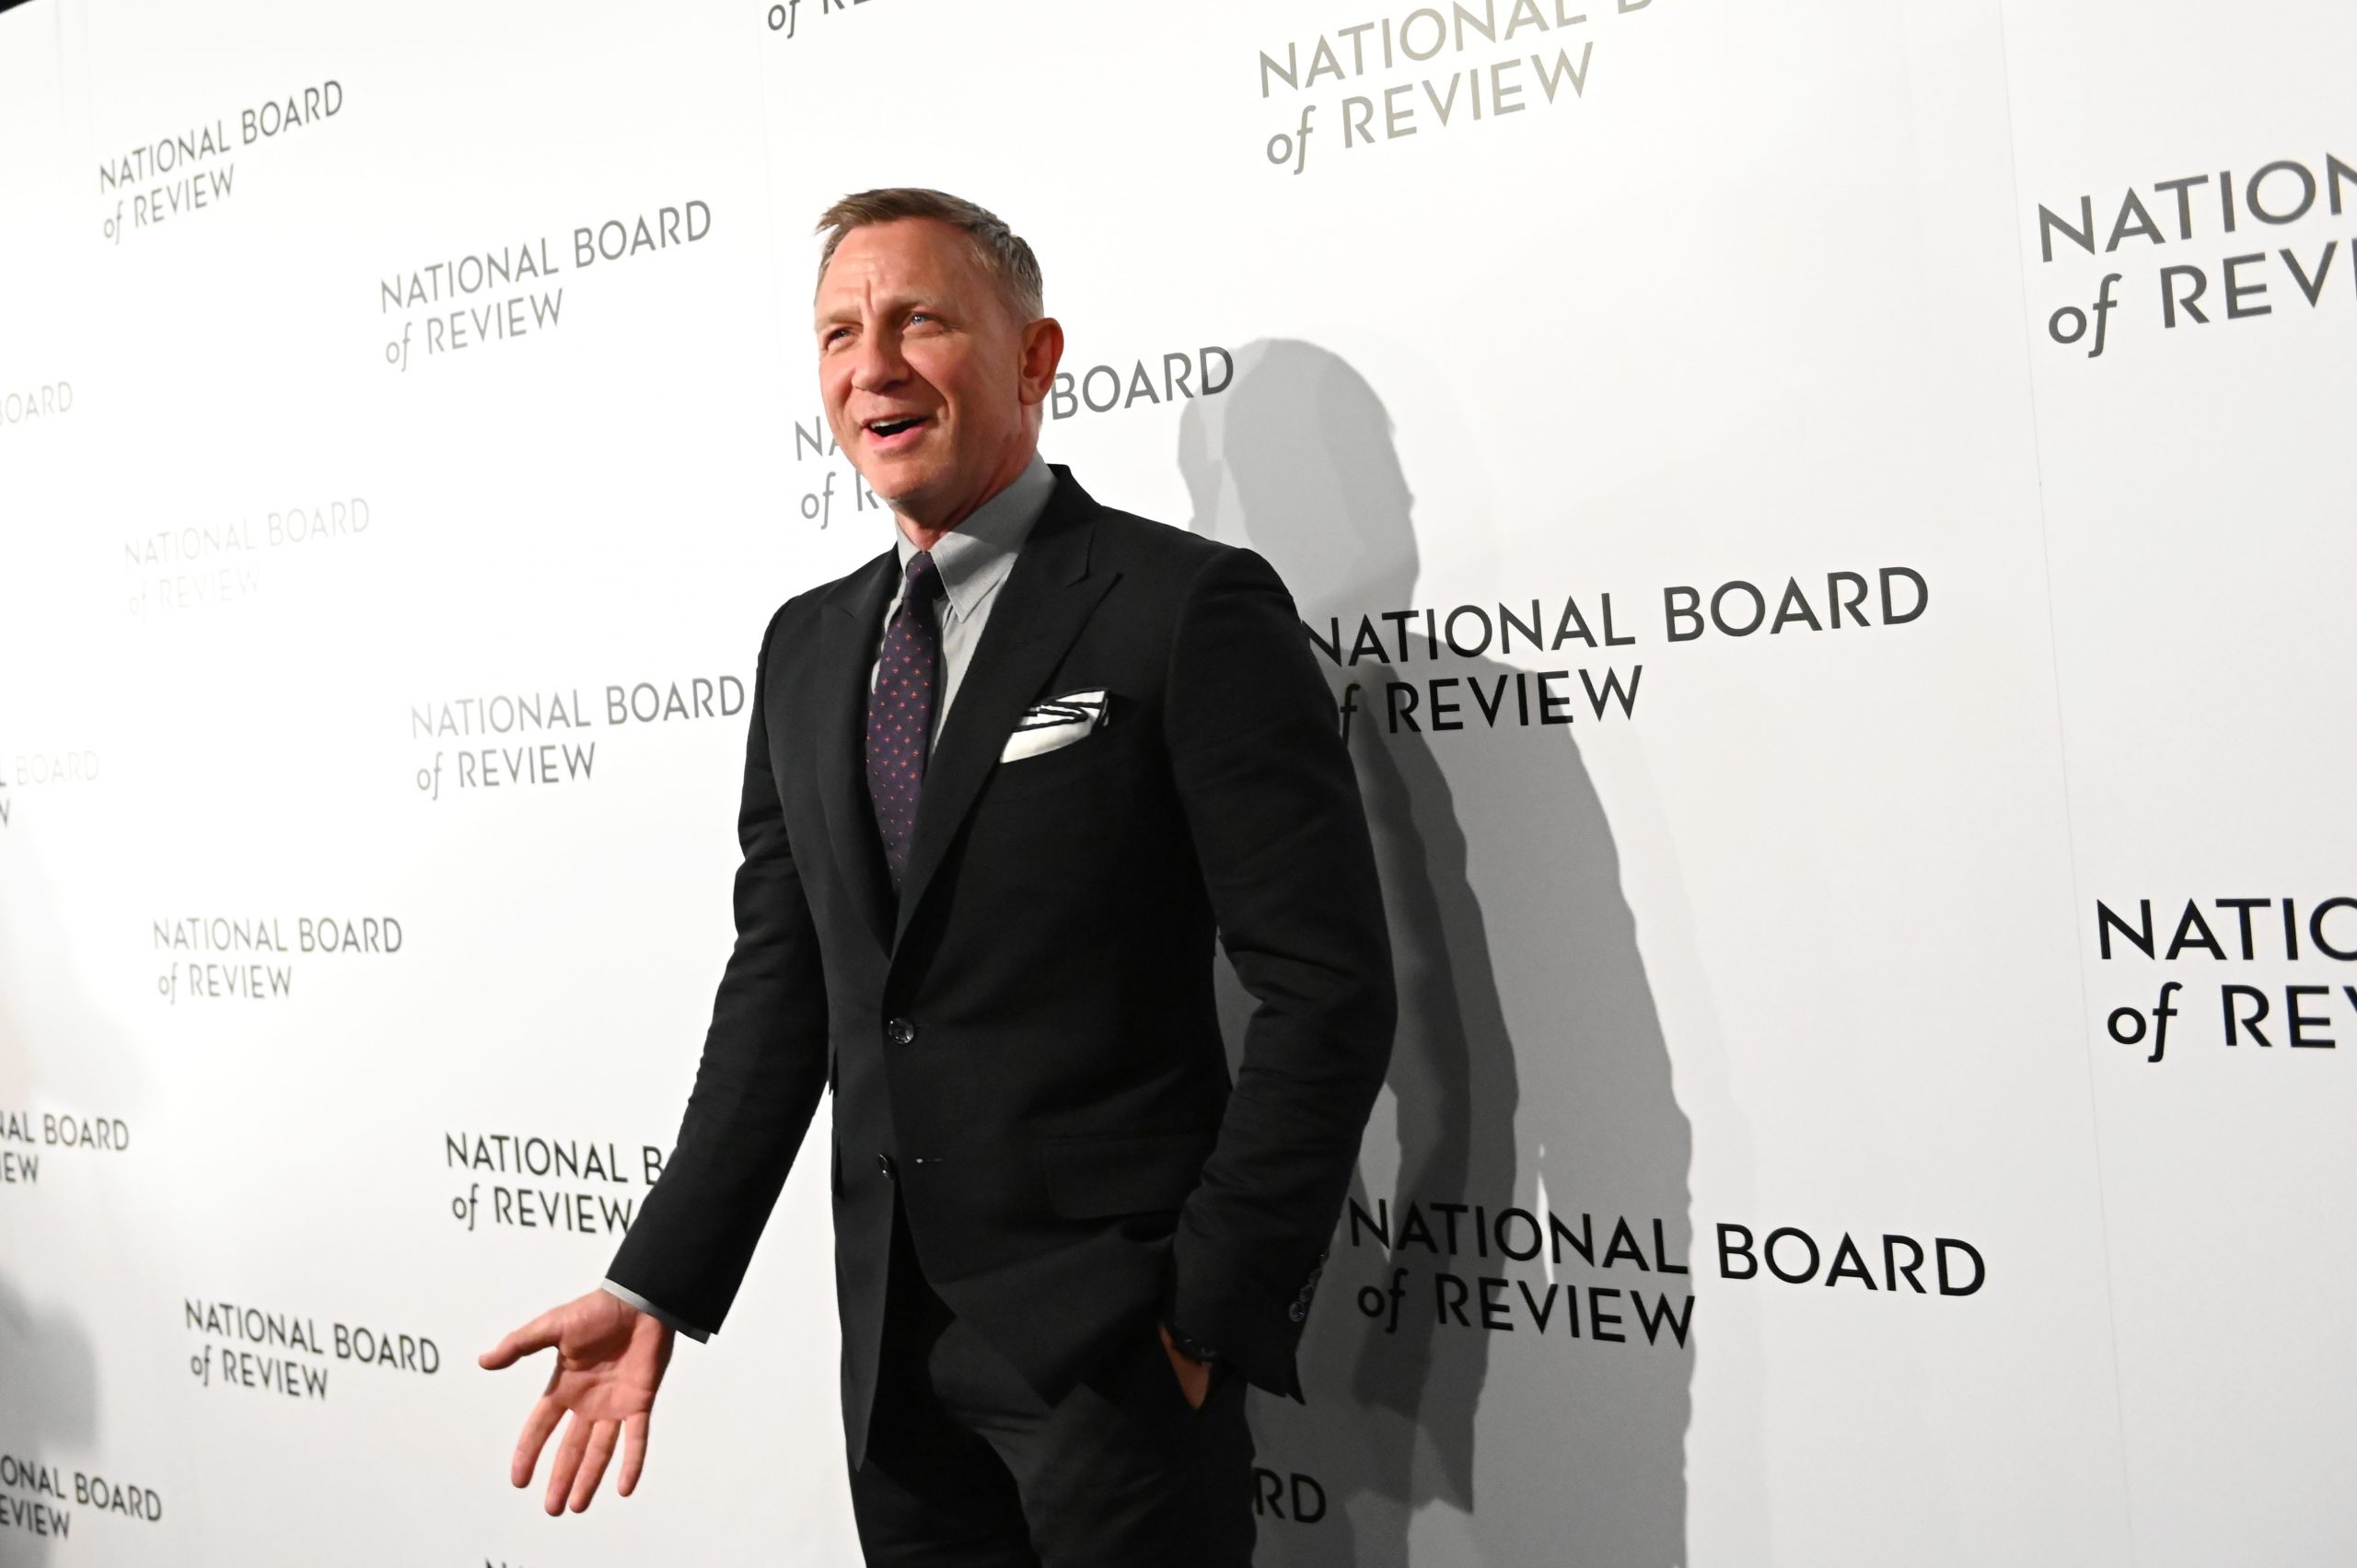 James Bond actor Daniel Craig attends the 2020 National Board of Review